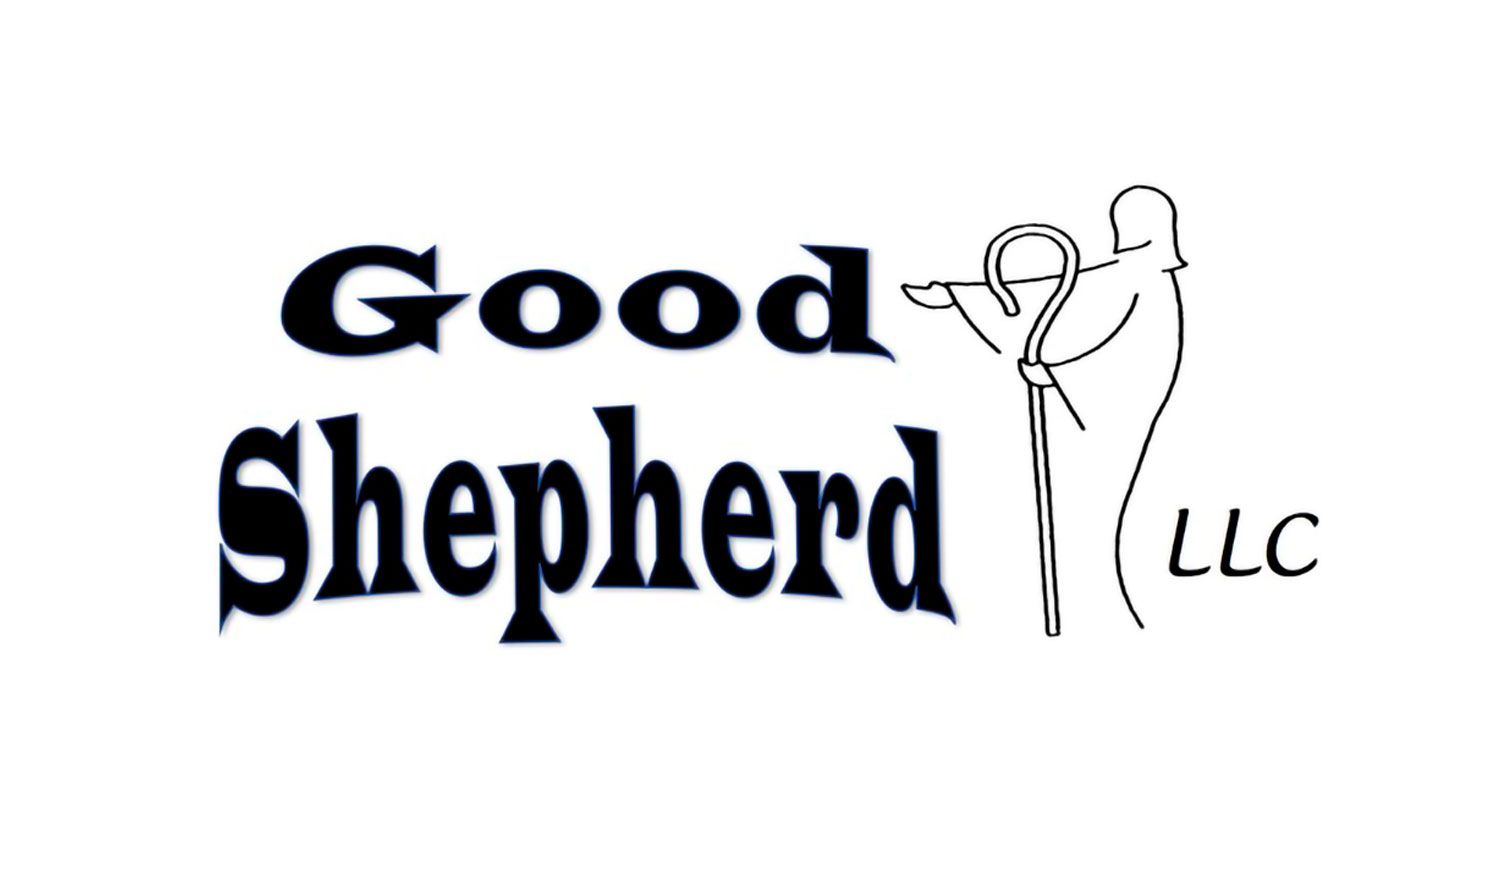 The Good Shepherd LLC brand is proudly displayed on our trucks and represents both our farm and our desire to live on mission and share the love and knowledge of God wherever we go.